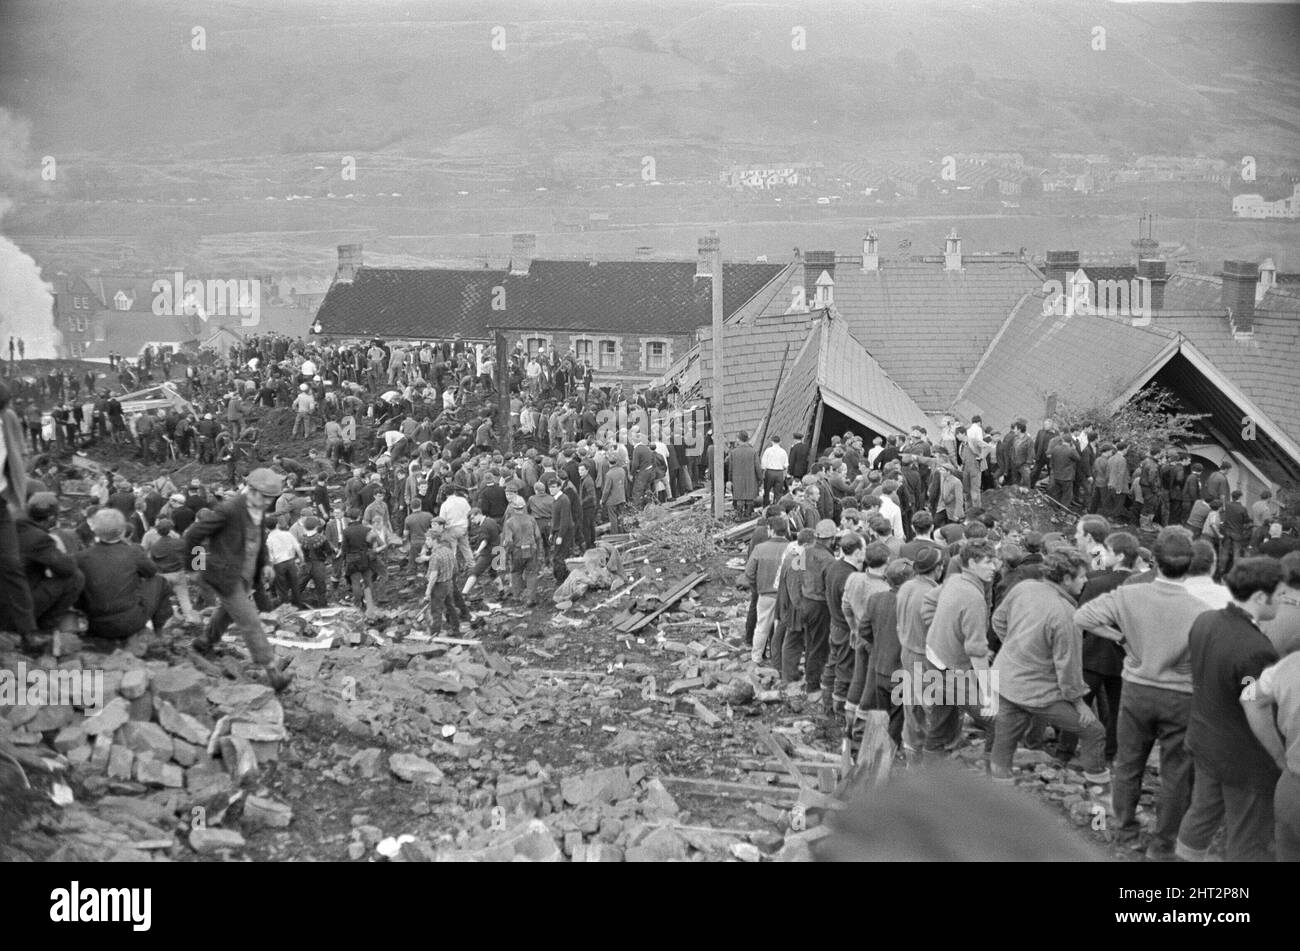 Aberfan - 21st October 1966 Local men and the emergency services hastily dig through the mud for survivors at The Pantglas Junior School.  They form lines so as to move buckets of mud, from one to the other, away from the scene.  And to be in line, moving up the queue for their turn to dig.  The Aberfan disaster was a catastrophic collapse of a colliery spoil tip in the Welsh village of Aberfan, near Merthyr Tydfil. It was caused by a build-up of water in the accumulated rock and shale, which suddenly started to slide downhill in the form of slurry and engulfed The Pantglas Junior School below Stock Photo